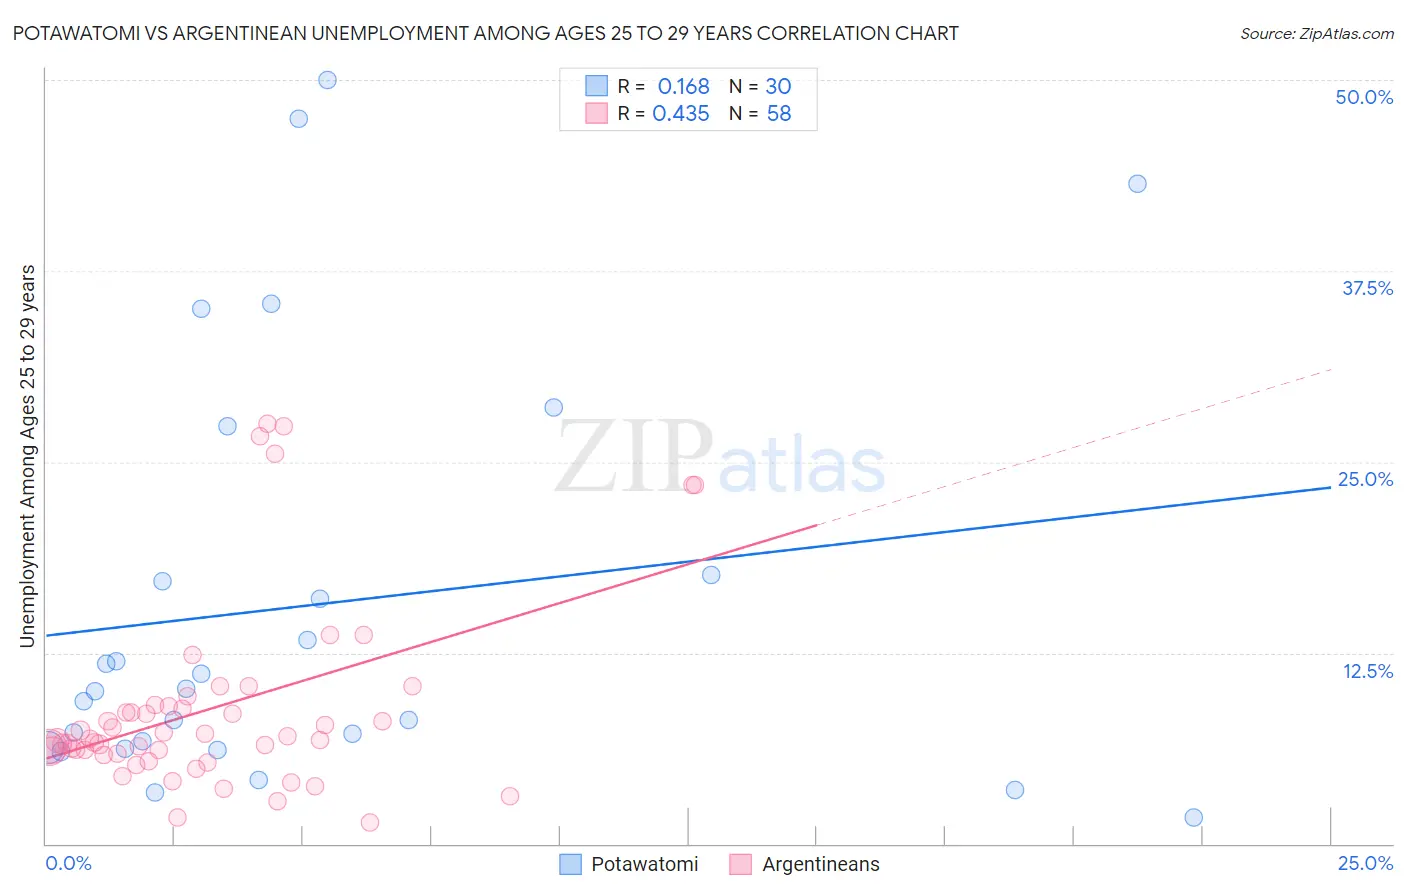 Potawatomi vs Argentinean Unemployment Among Ages 25 to 29 years